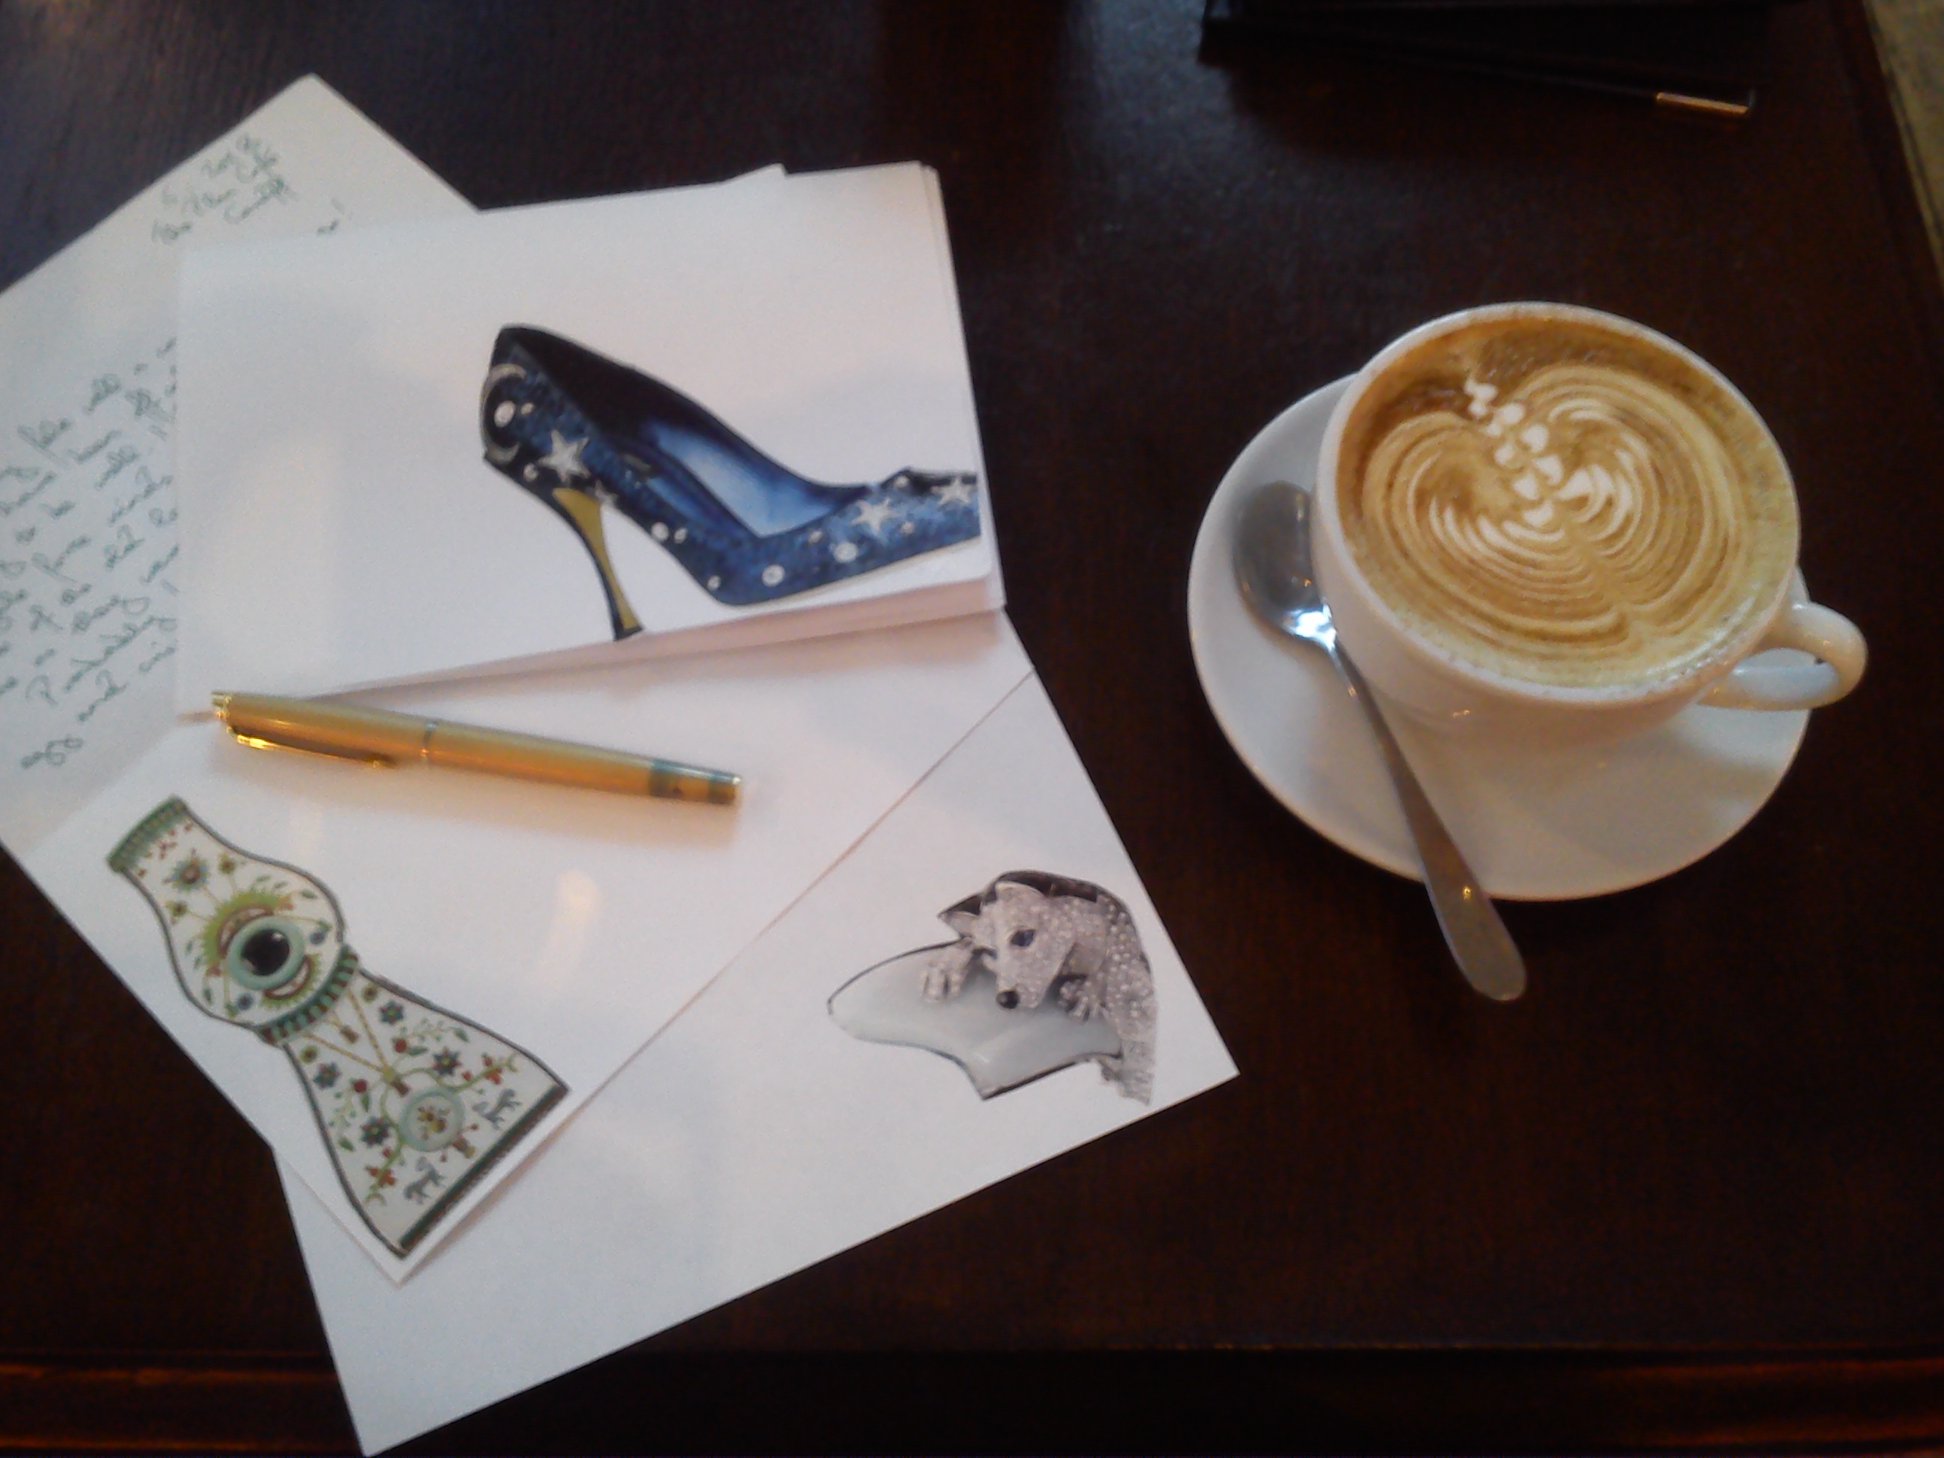 Half-written letter decorated with decoupage pictures, a fountain pen and a cup of coffee.